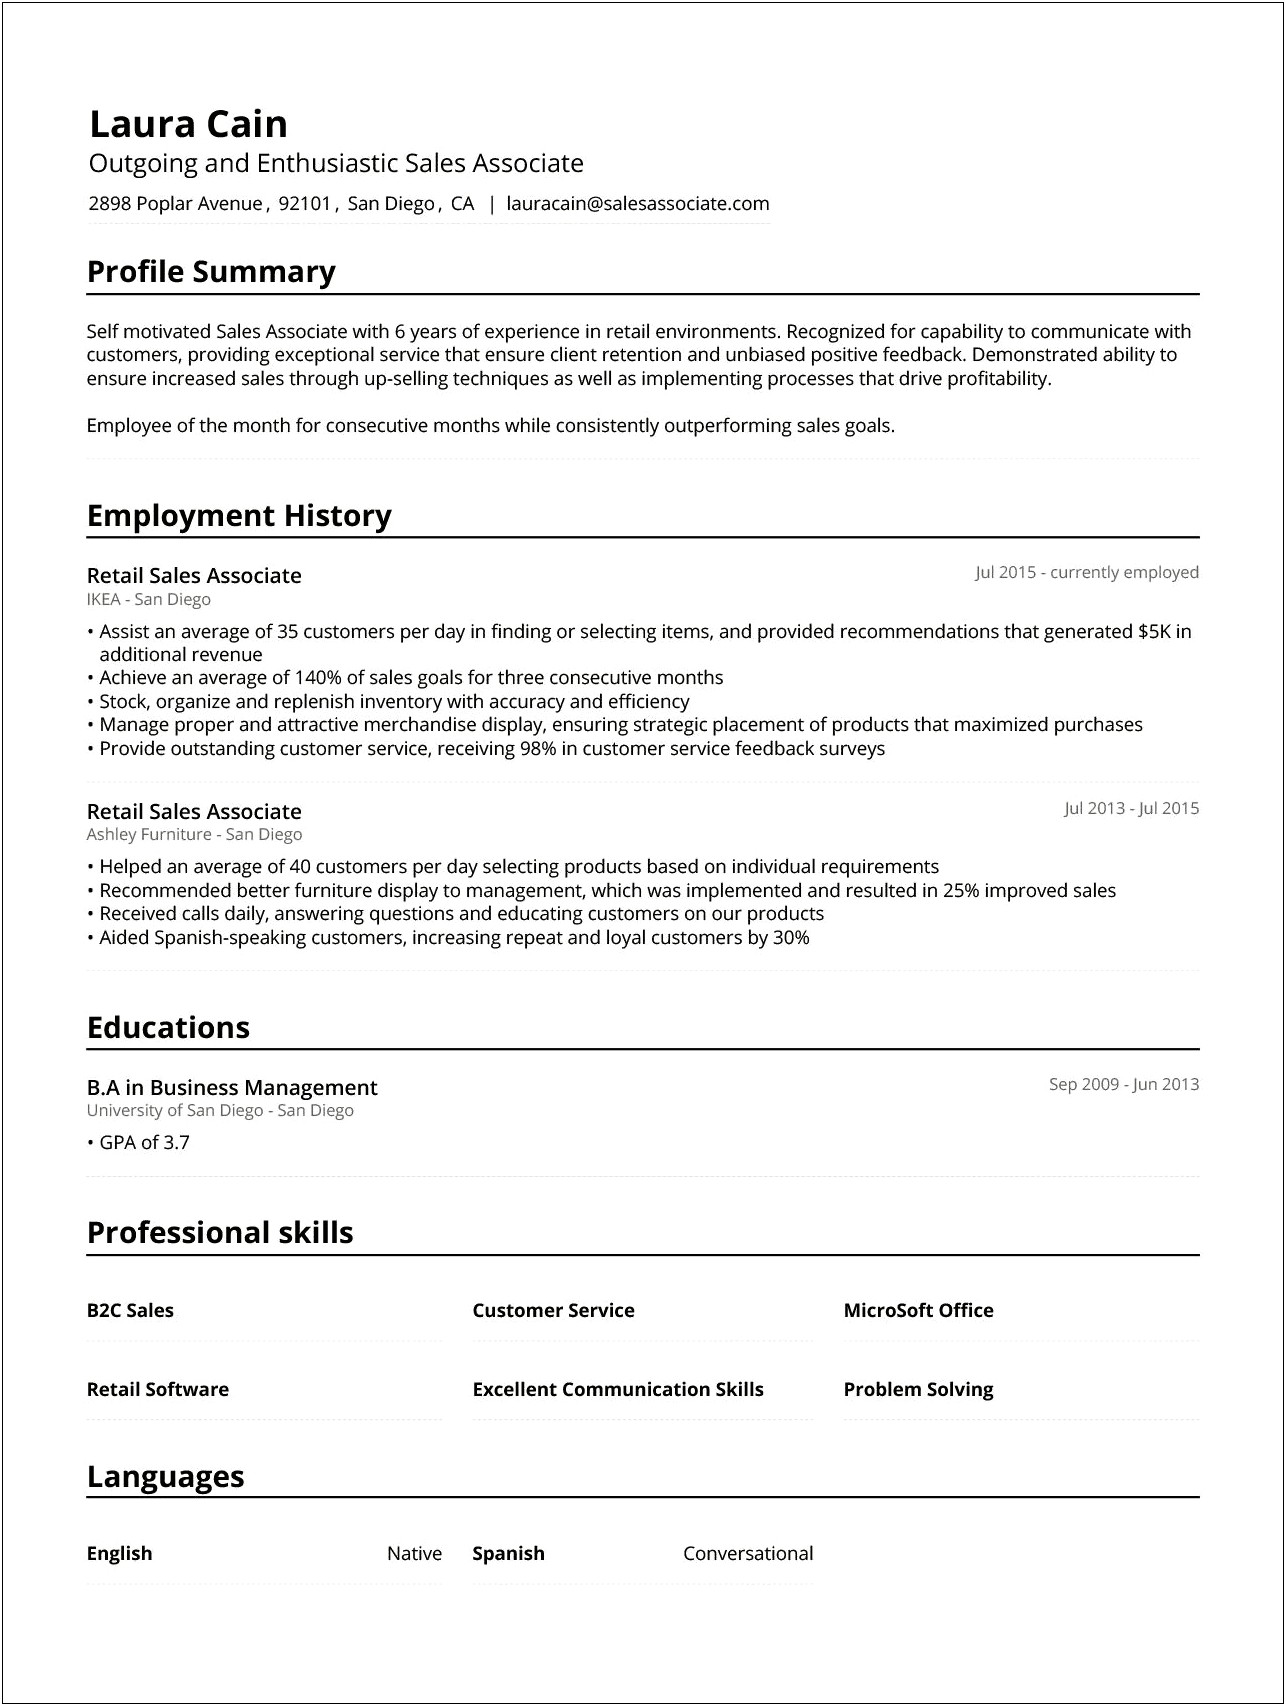 Resume Examples Profile And Purpose